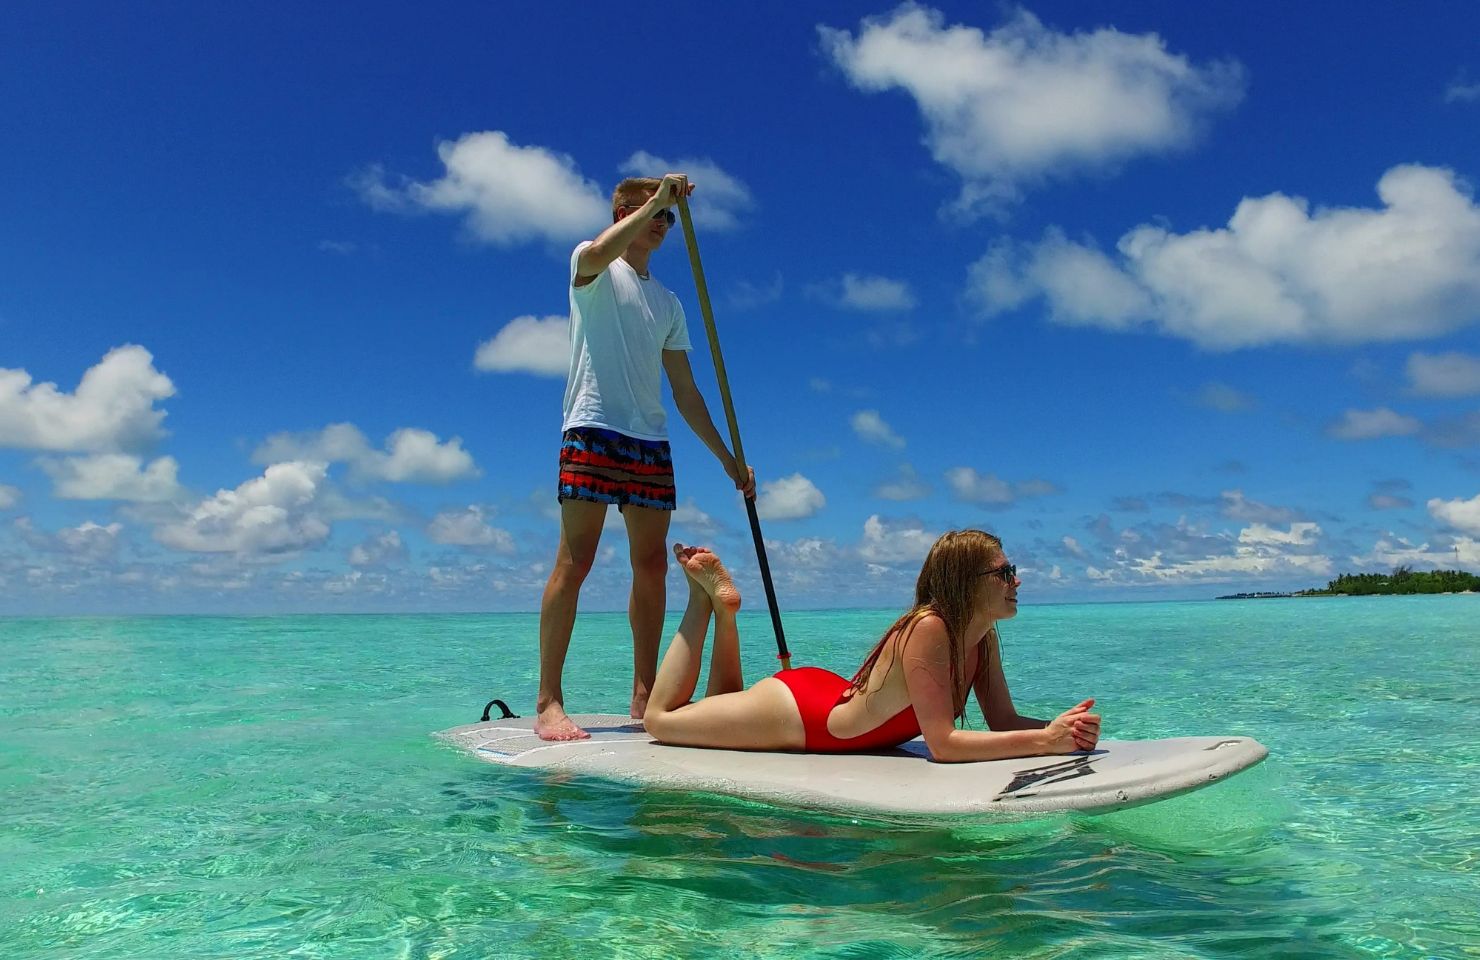 man standing on a sup board and woman lying down